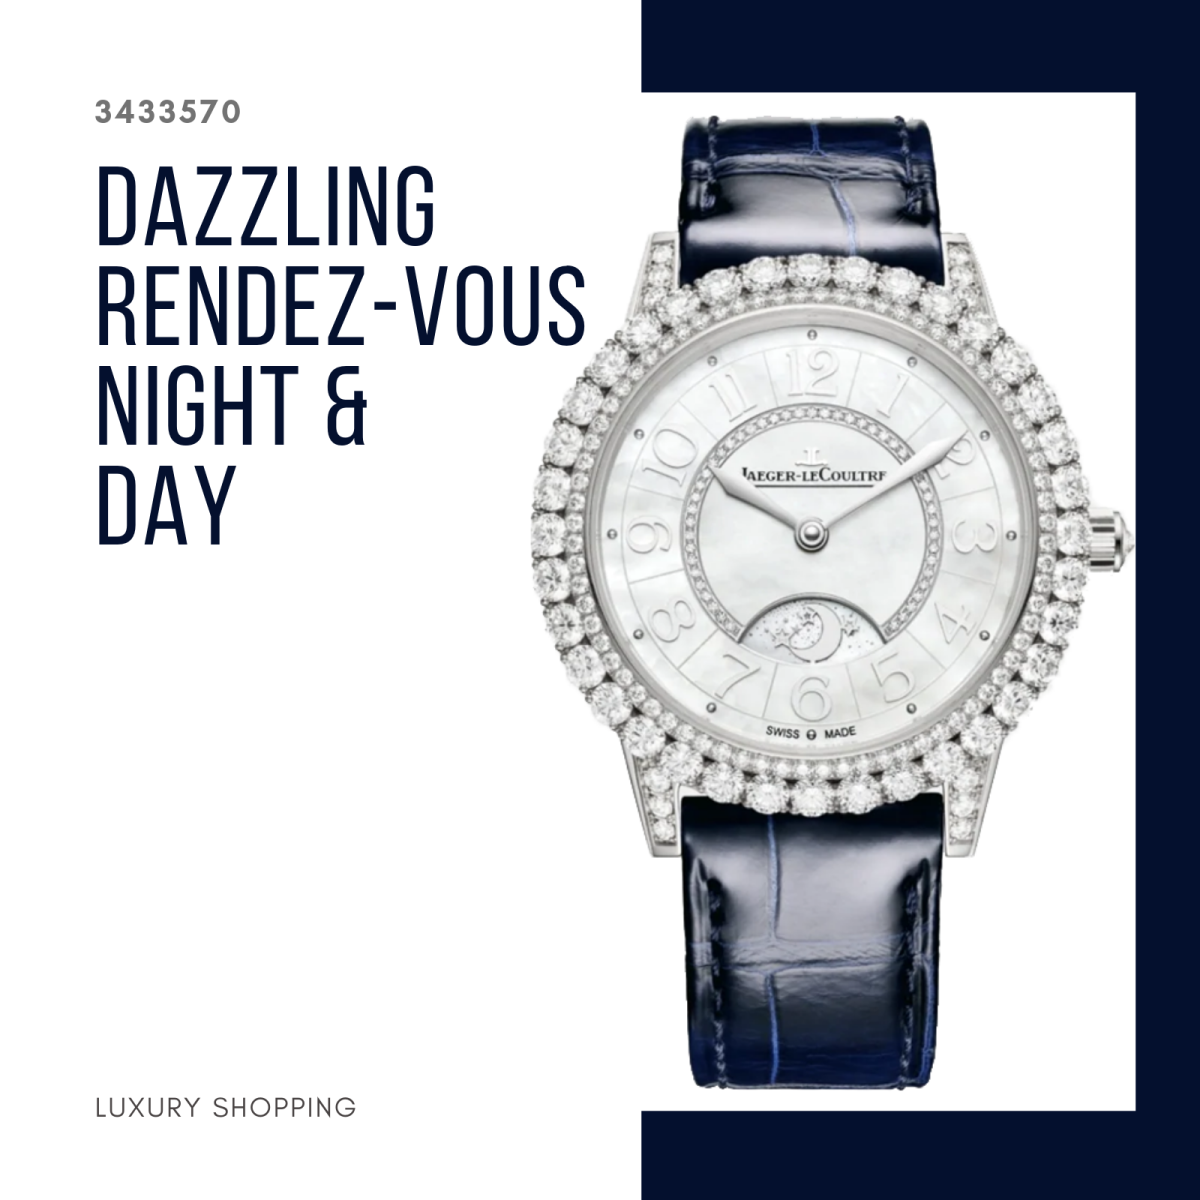 đồng hồ nữ Jaeger-LeCoultre 3433570 Dazzling Rendez-Vous Night & Day